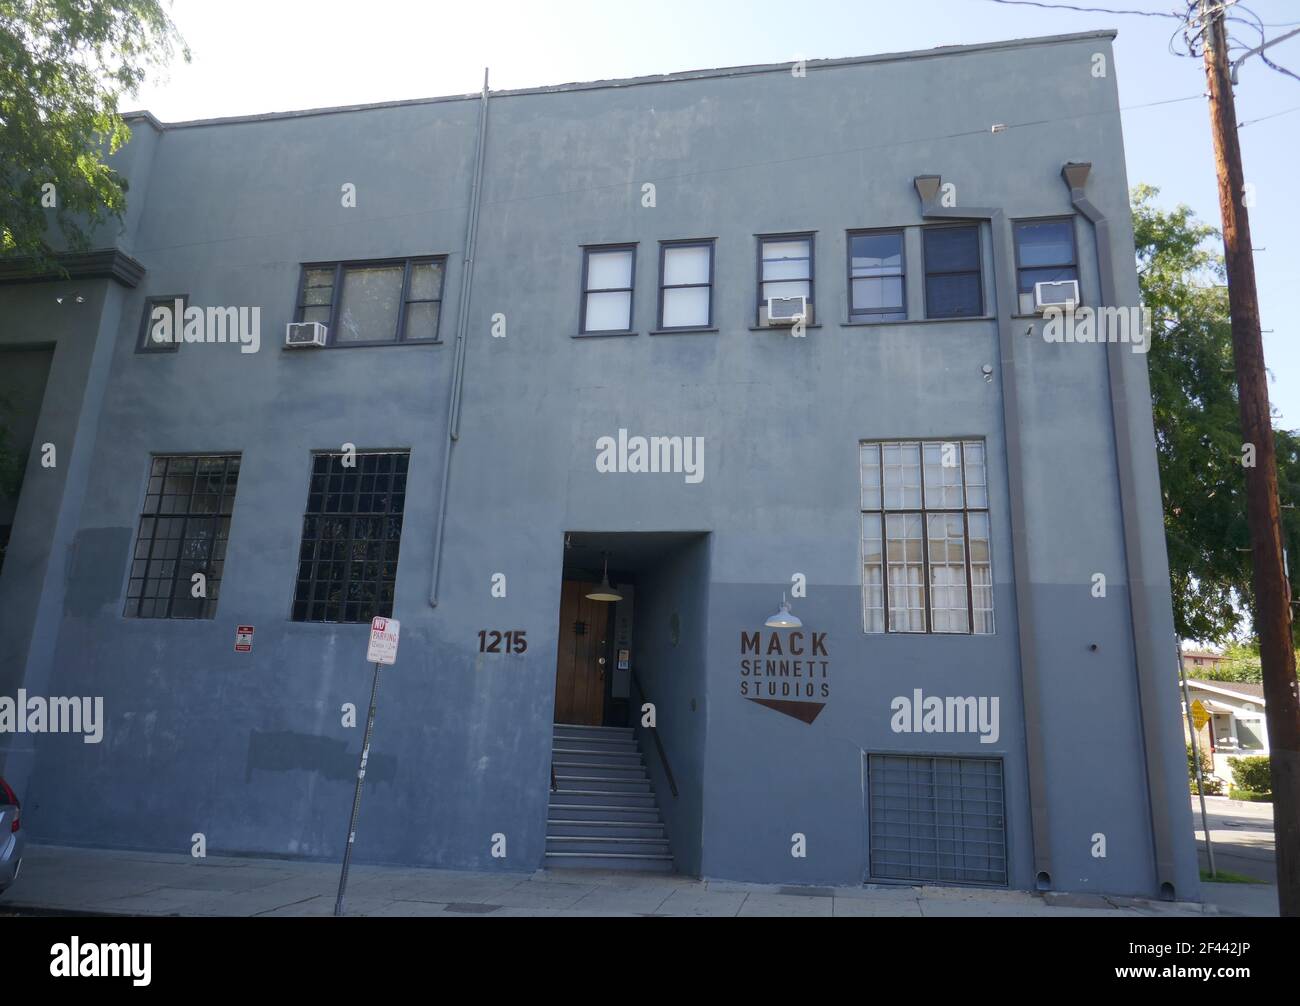 Los Angeles, California, USA 18th March 2021 A general view of atmosphere of Mack Sennett Studios at 1215 Bates Avenue in Los Angeles, California, USA. Photo by Barry King/Alamy Stock Photo Stock Photo